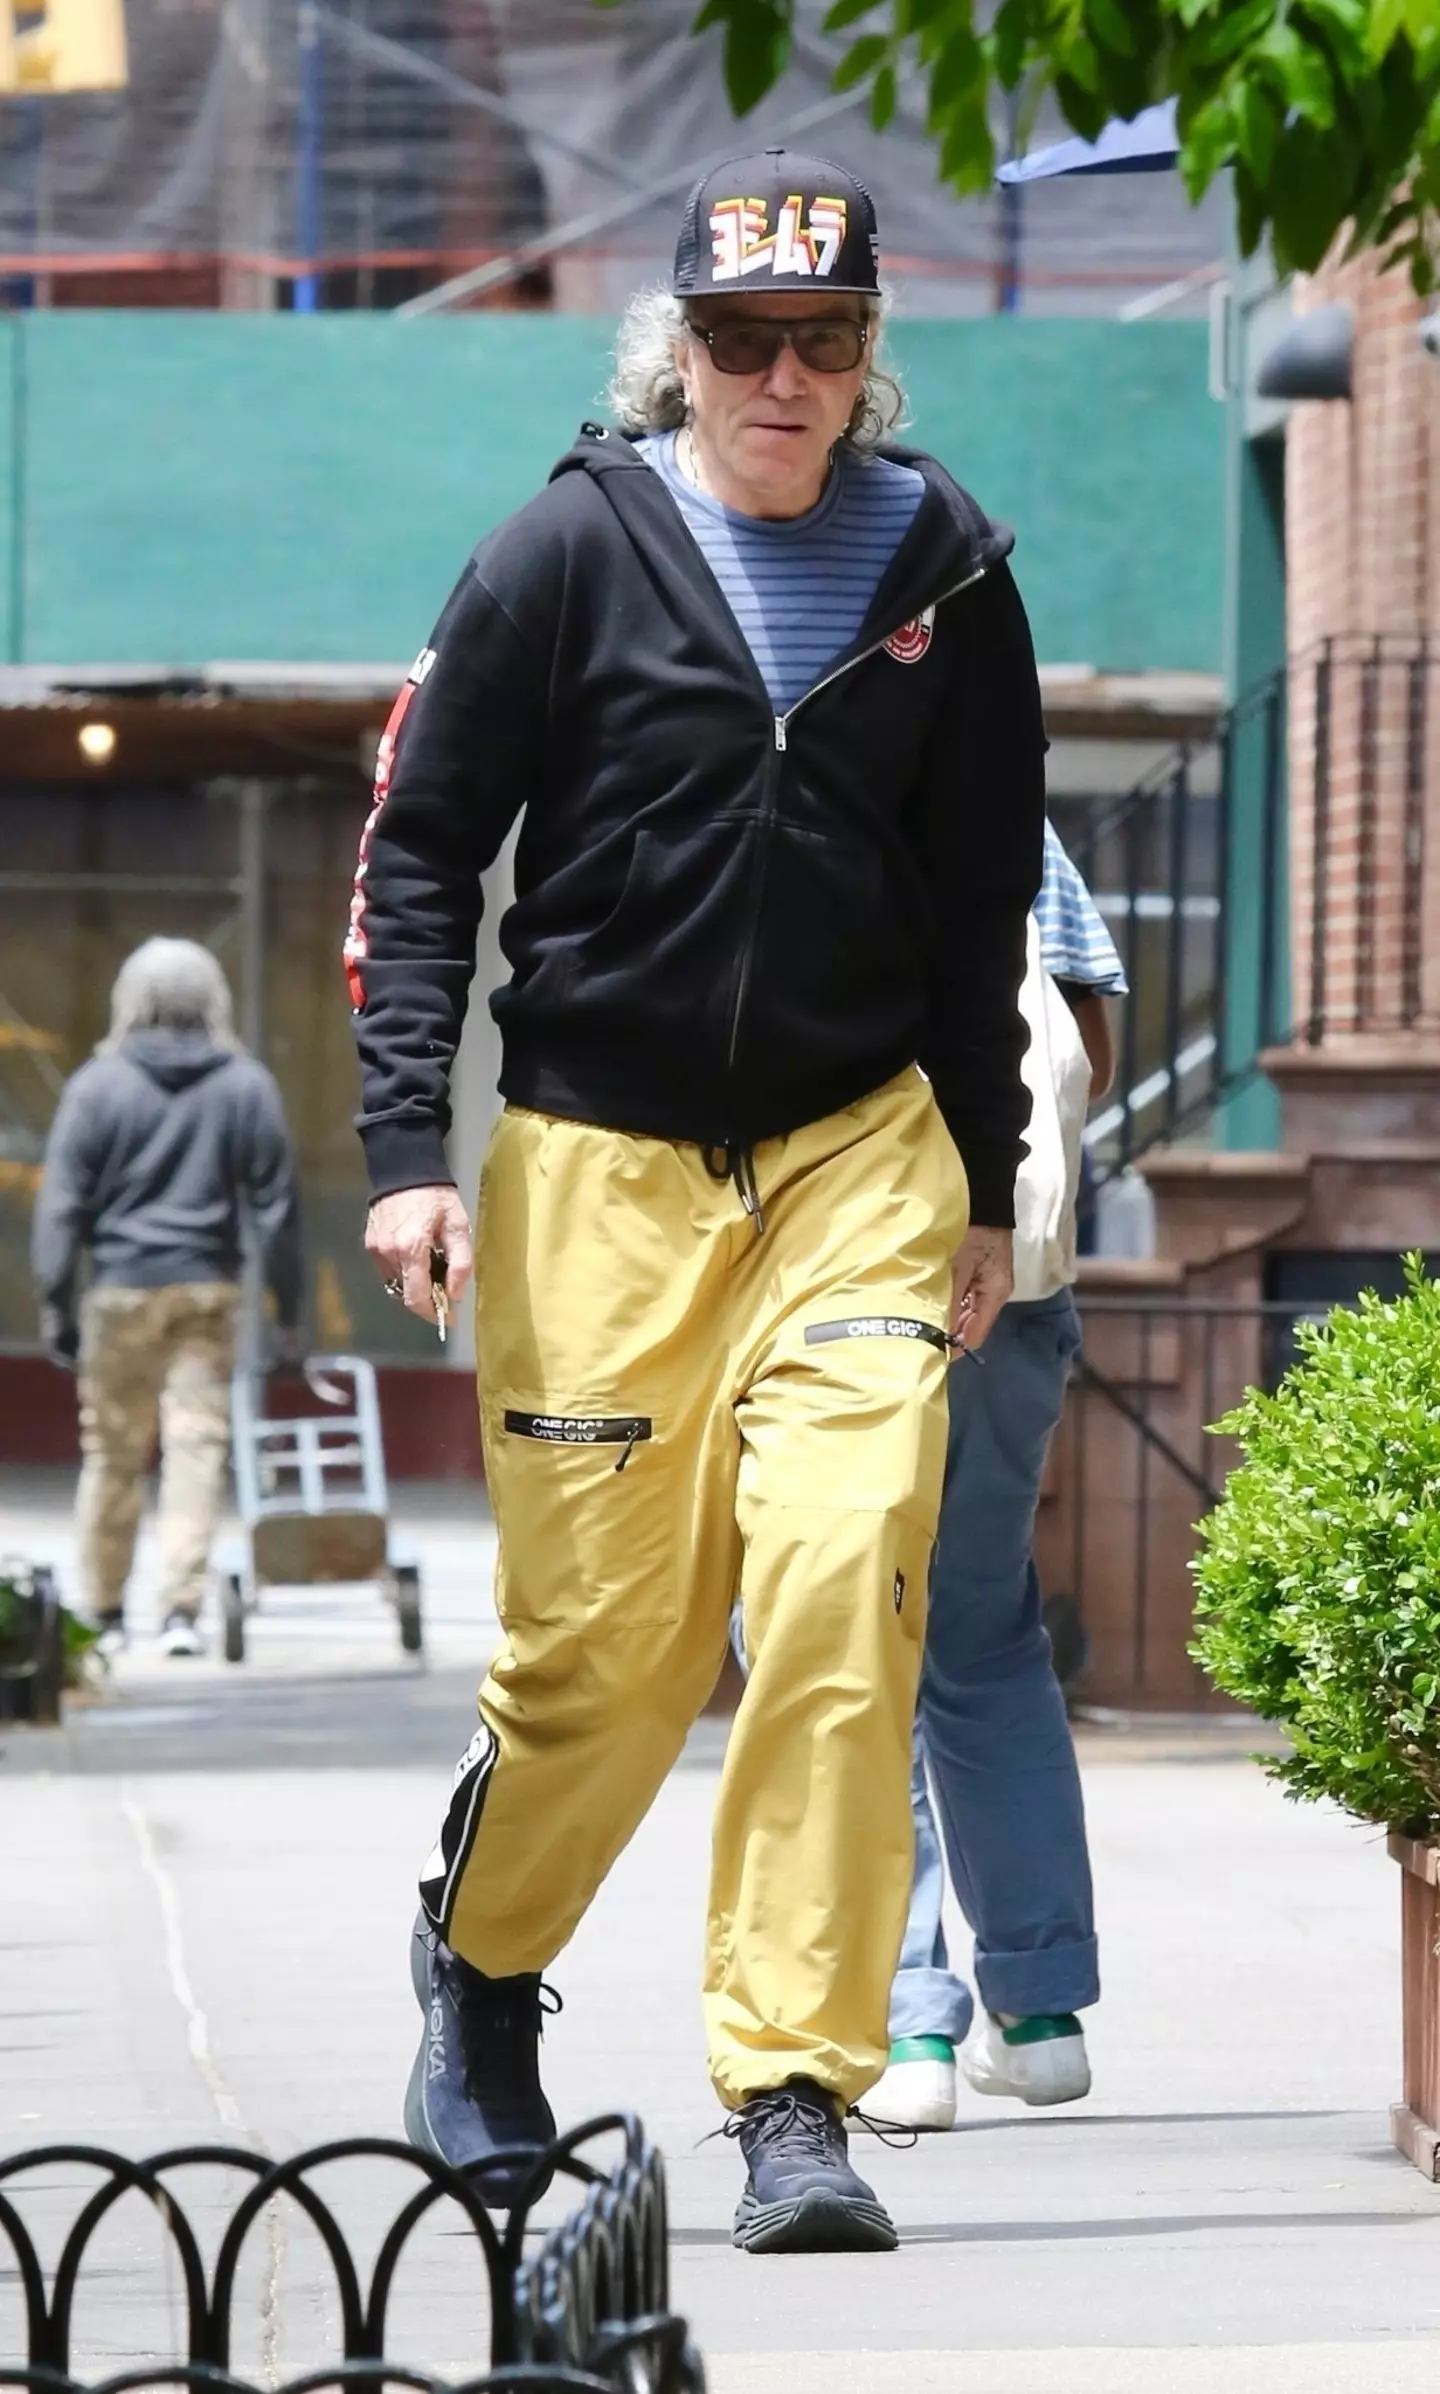 Daniel Day-Lewis was spotted out and about in New York.